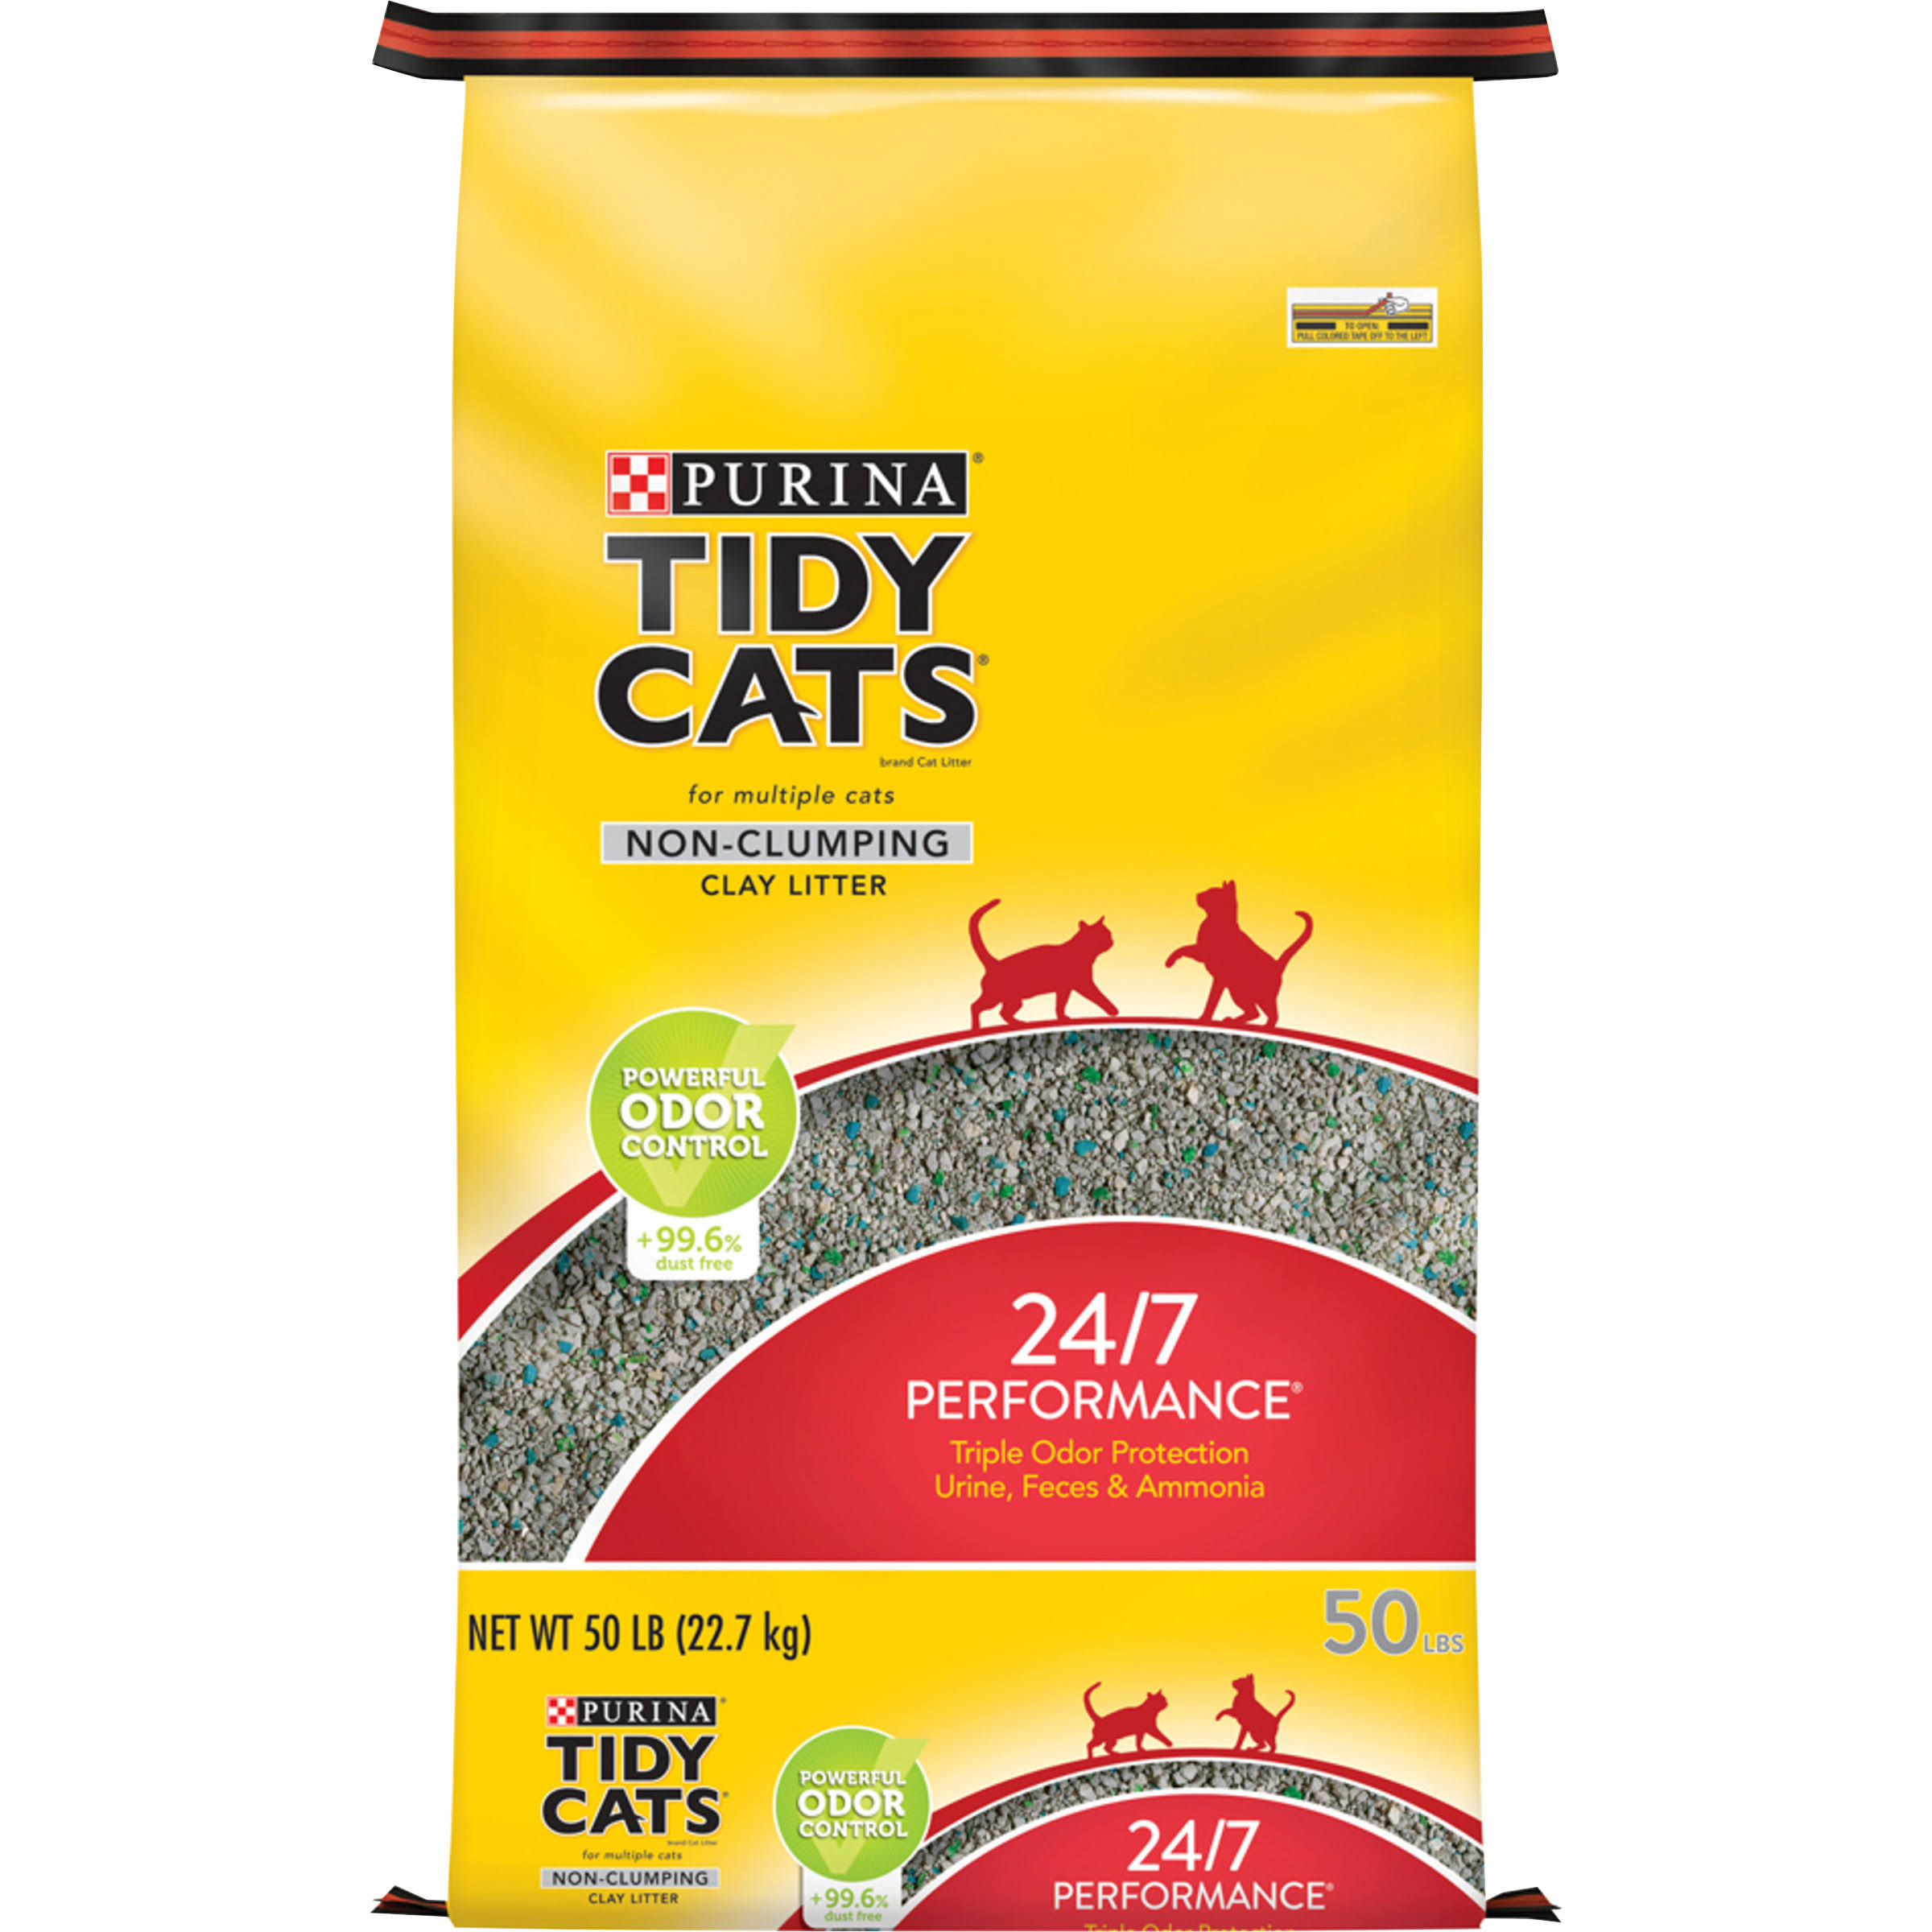 Purina Tidy Cats Non-Clumping Cat Litter - 22.7kg